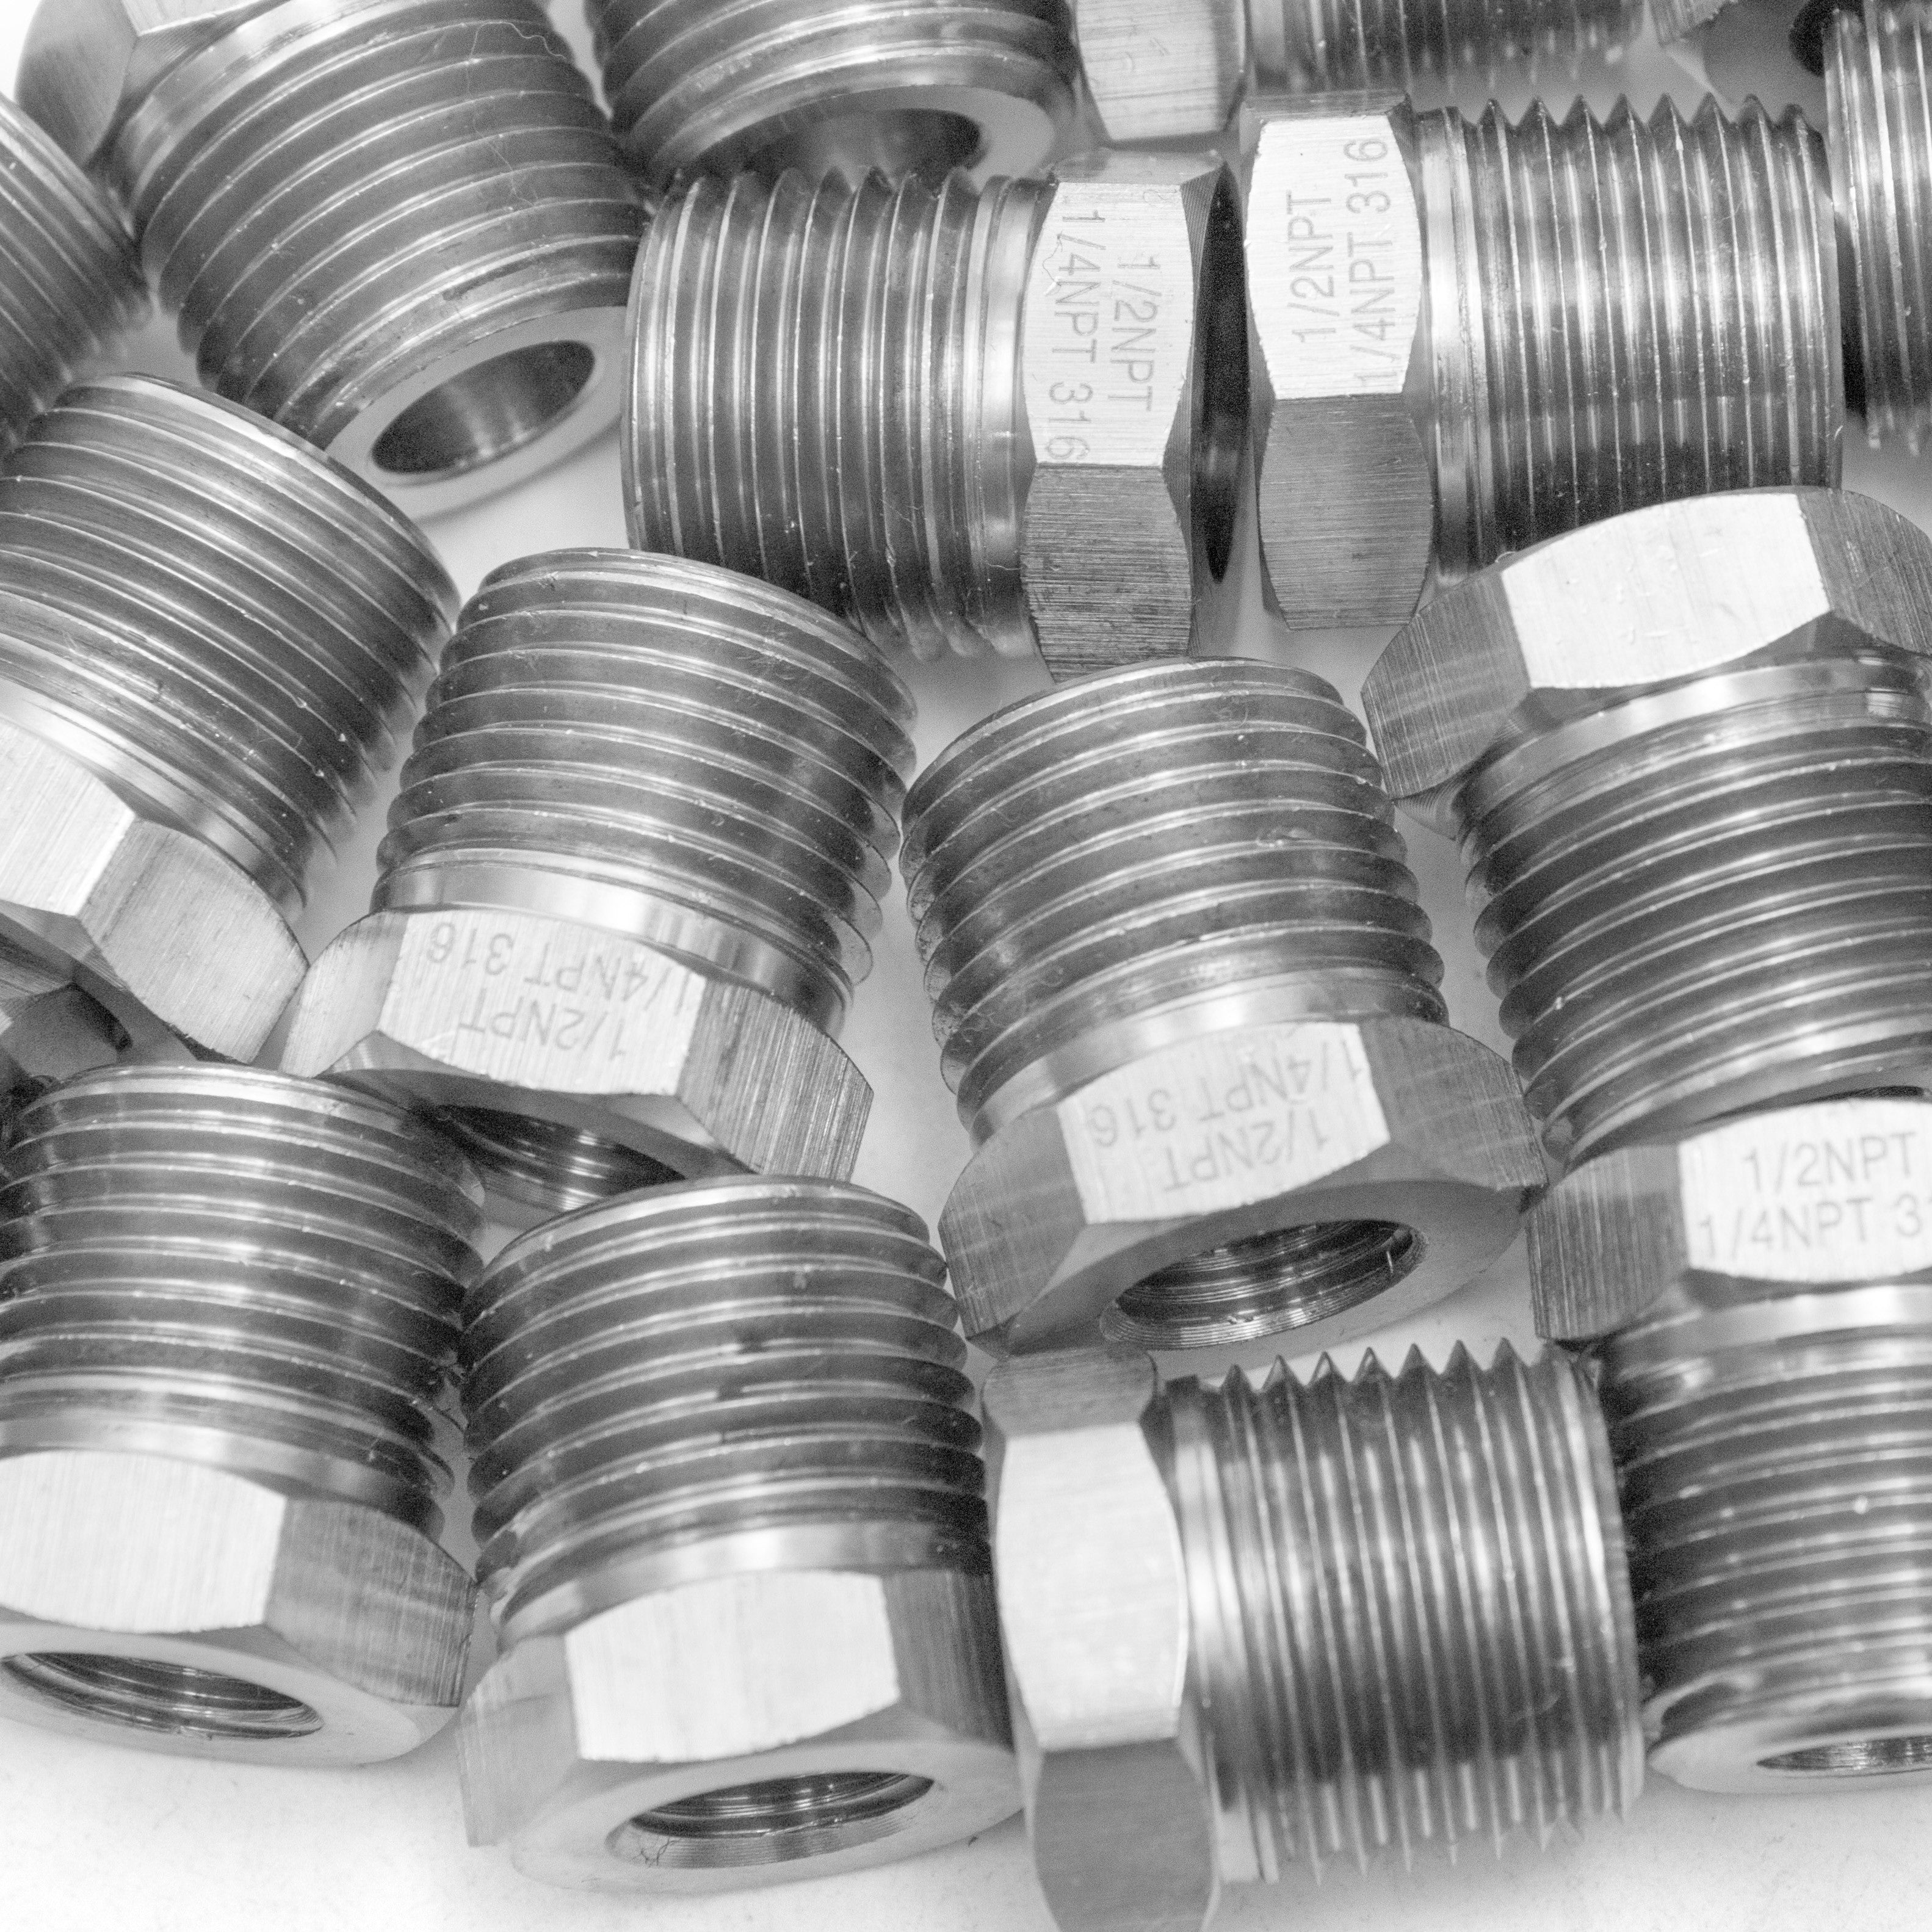 LTWFITTING Class 3000 Stainless Steel 316 Pipe Hex Bushing Reducer Fittings 1/2 Inch Male x 1/4 Inch Female NPT (Pack of 150)